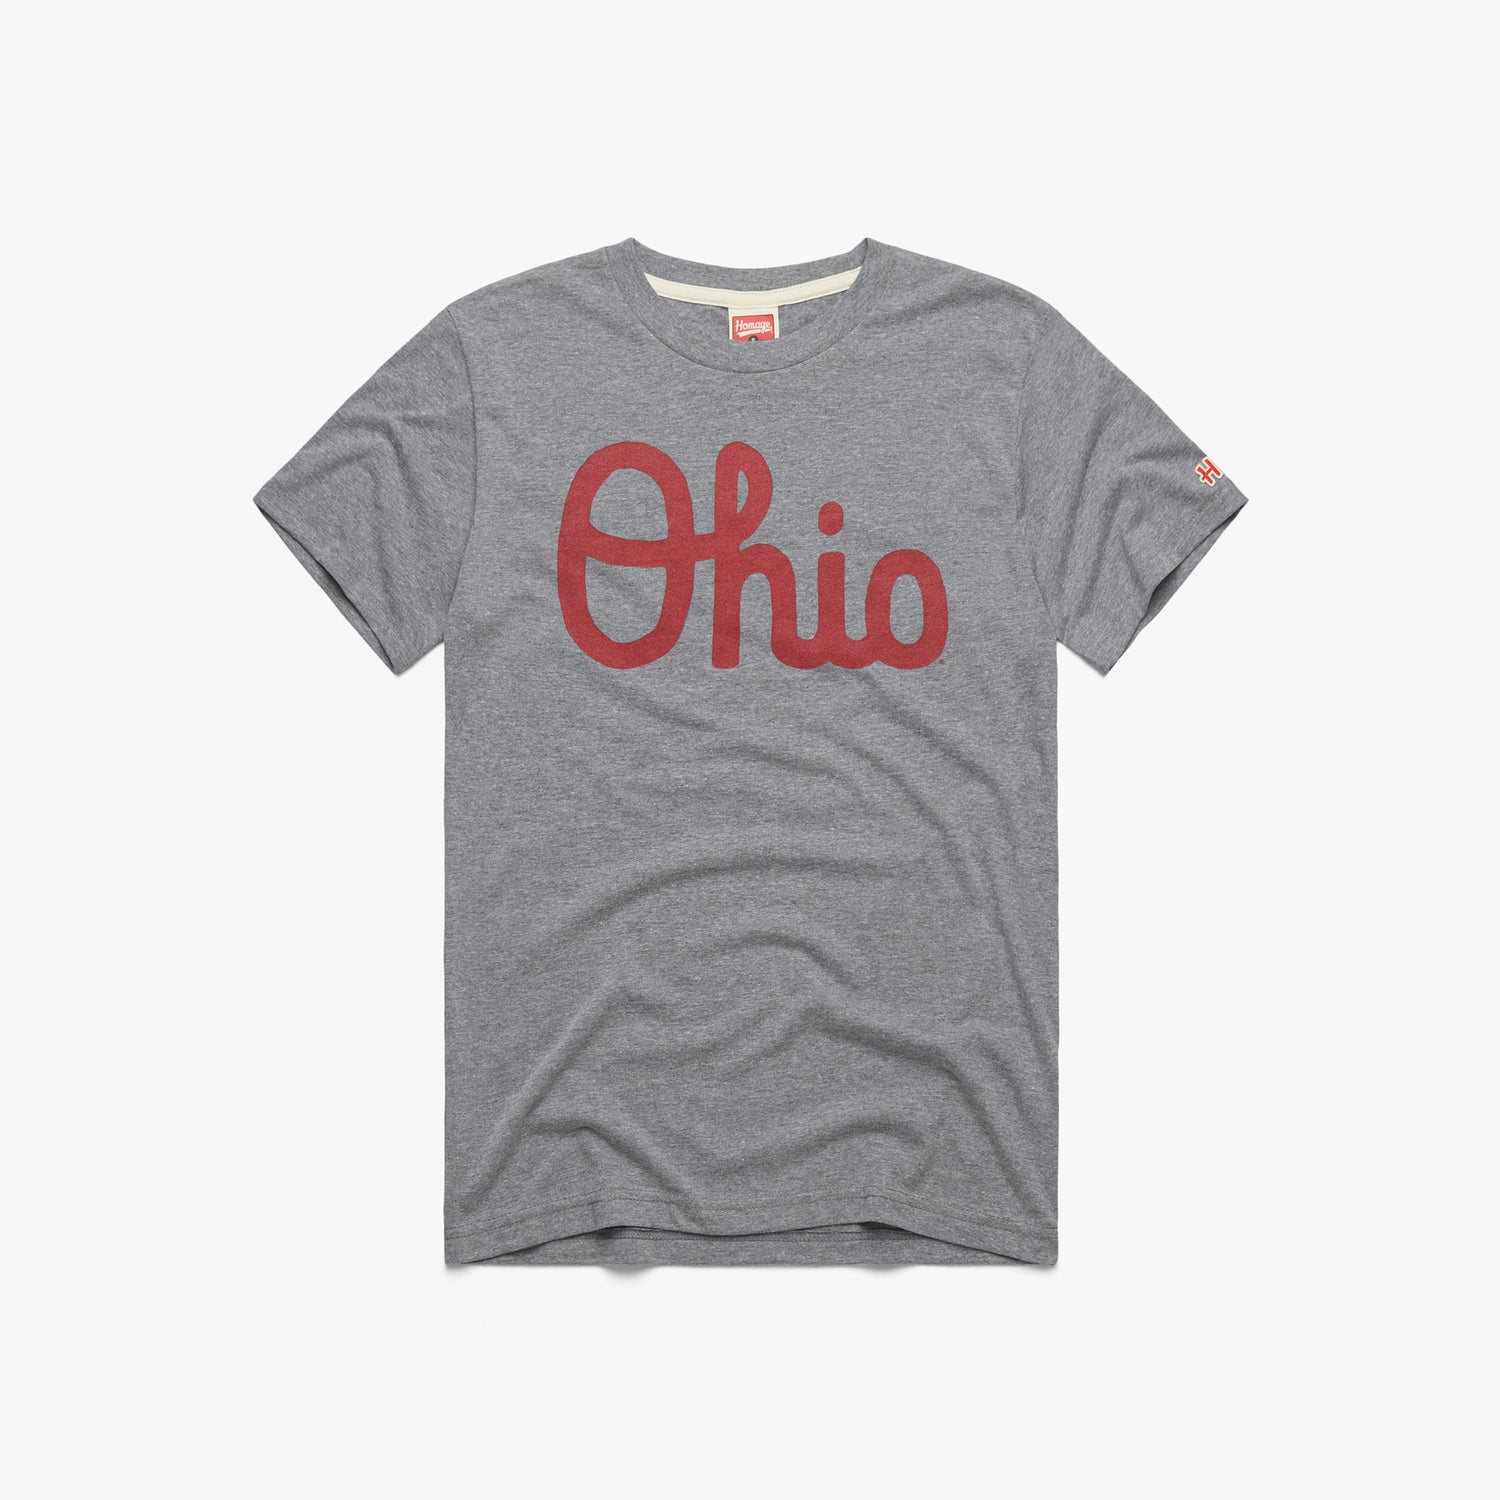 Columbus Ohio T-Shirt from Homage. | Navy | Vintage Apparel from Homage.